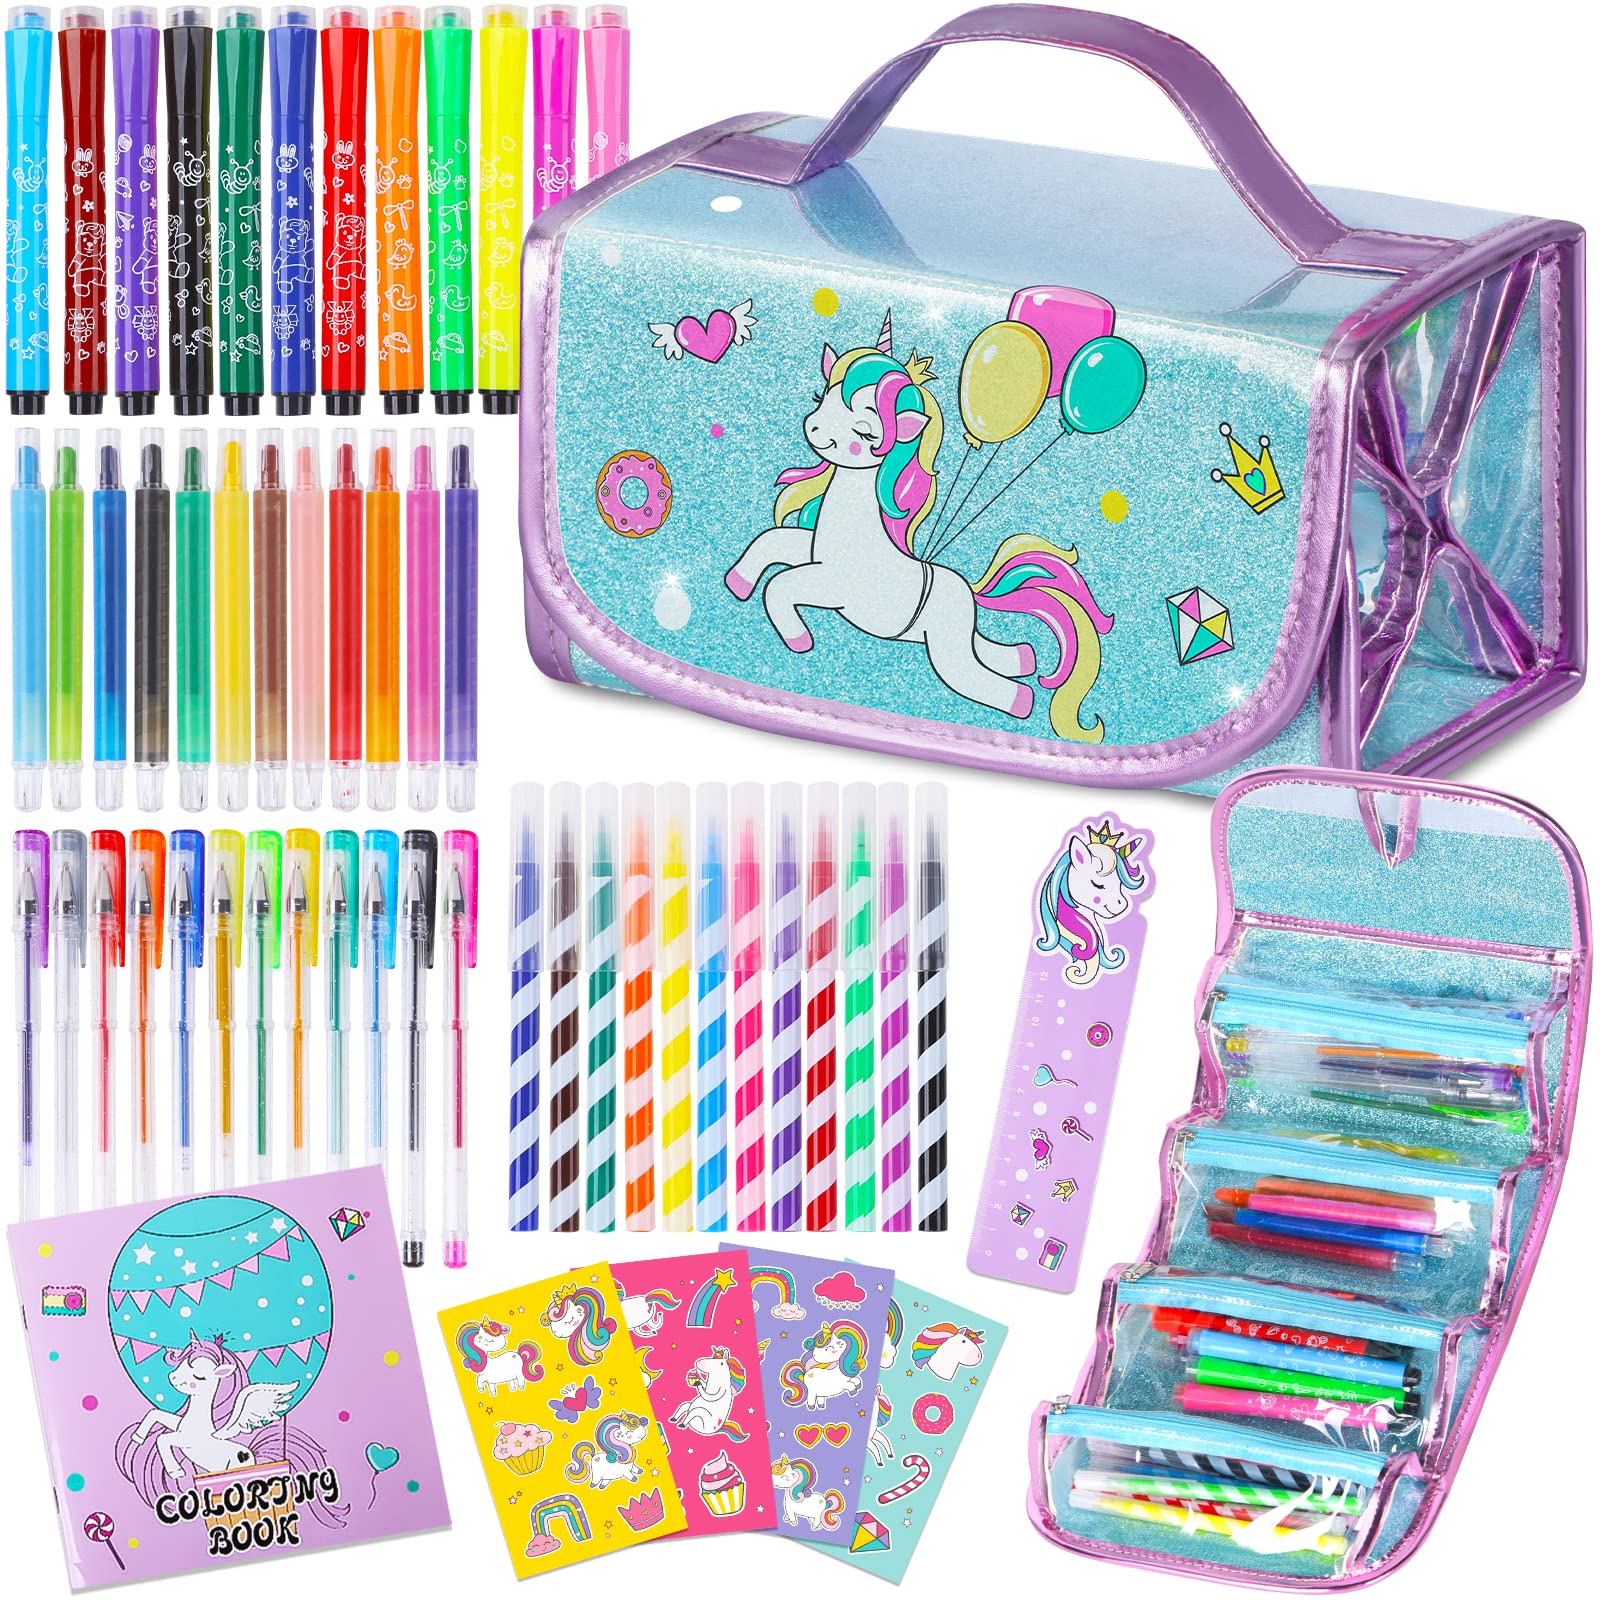 ABERLLS Unicorns Gifts For Girls 5 6 7 8 Year Old, Coloring Markers Set  With Unicorn Pencil Case, Unicorn Art Supplies For Kids, Craft D